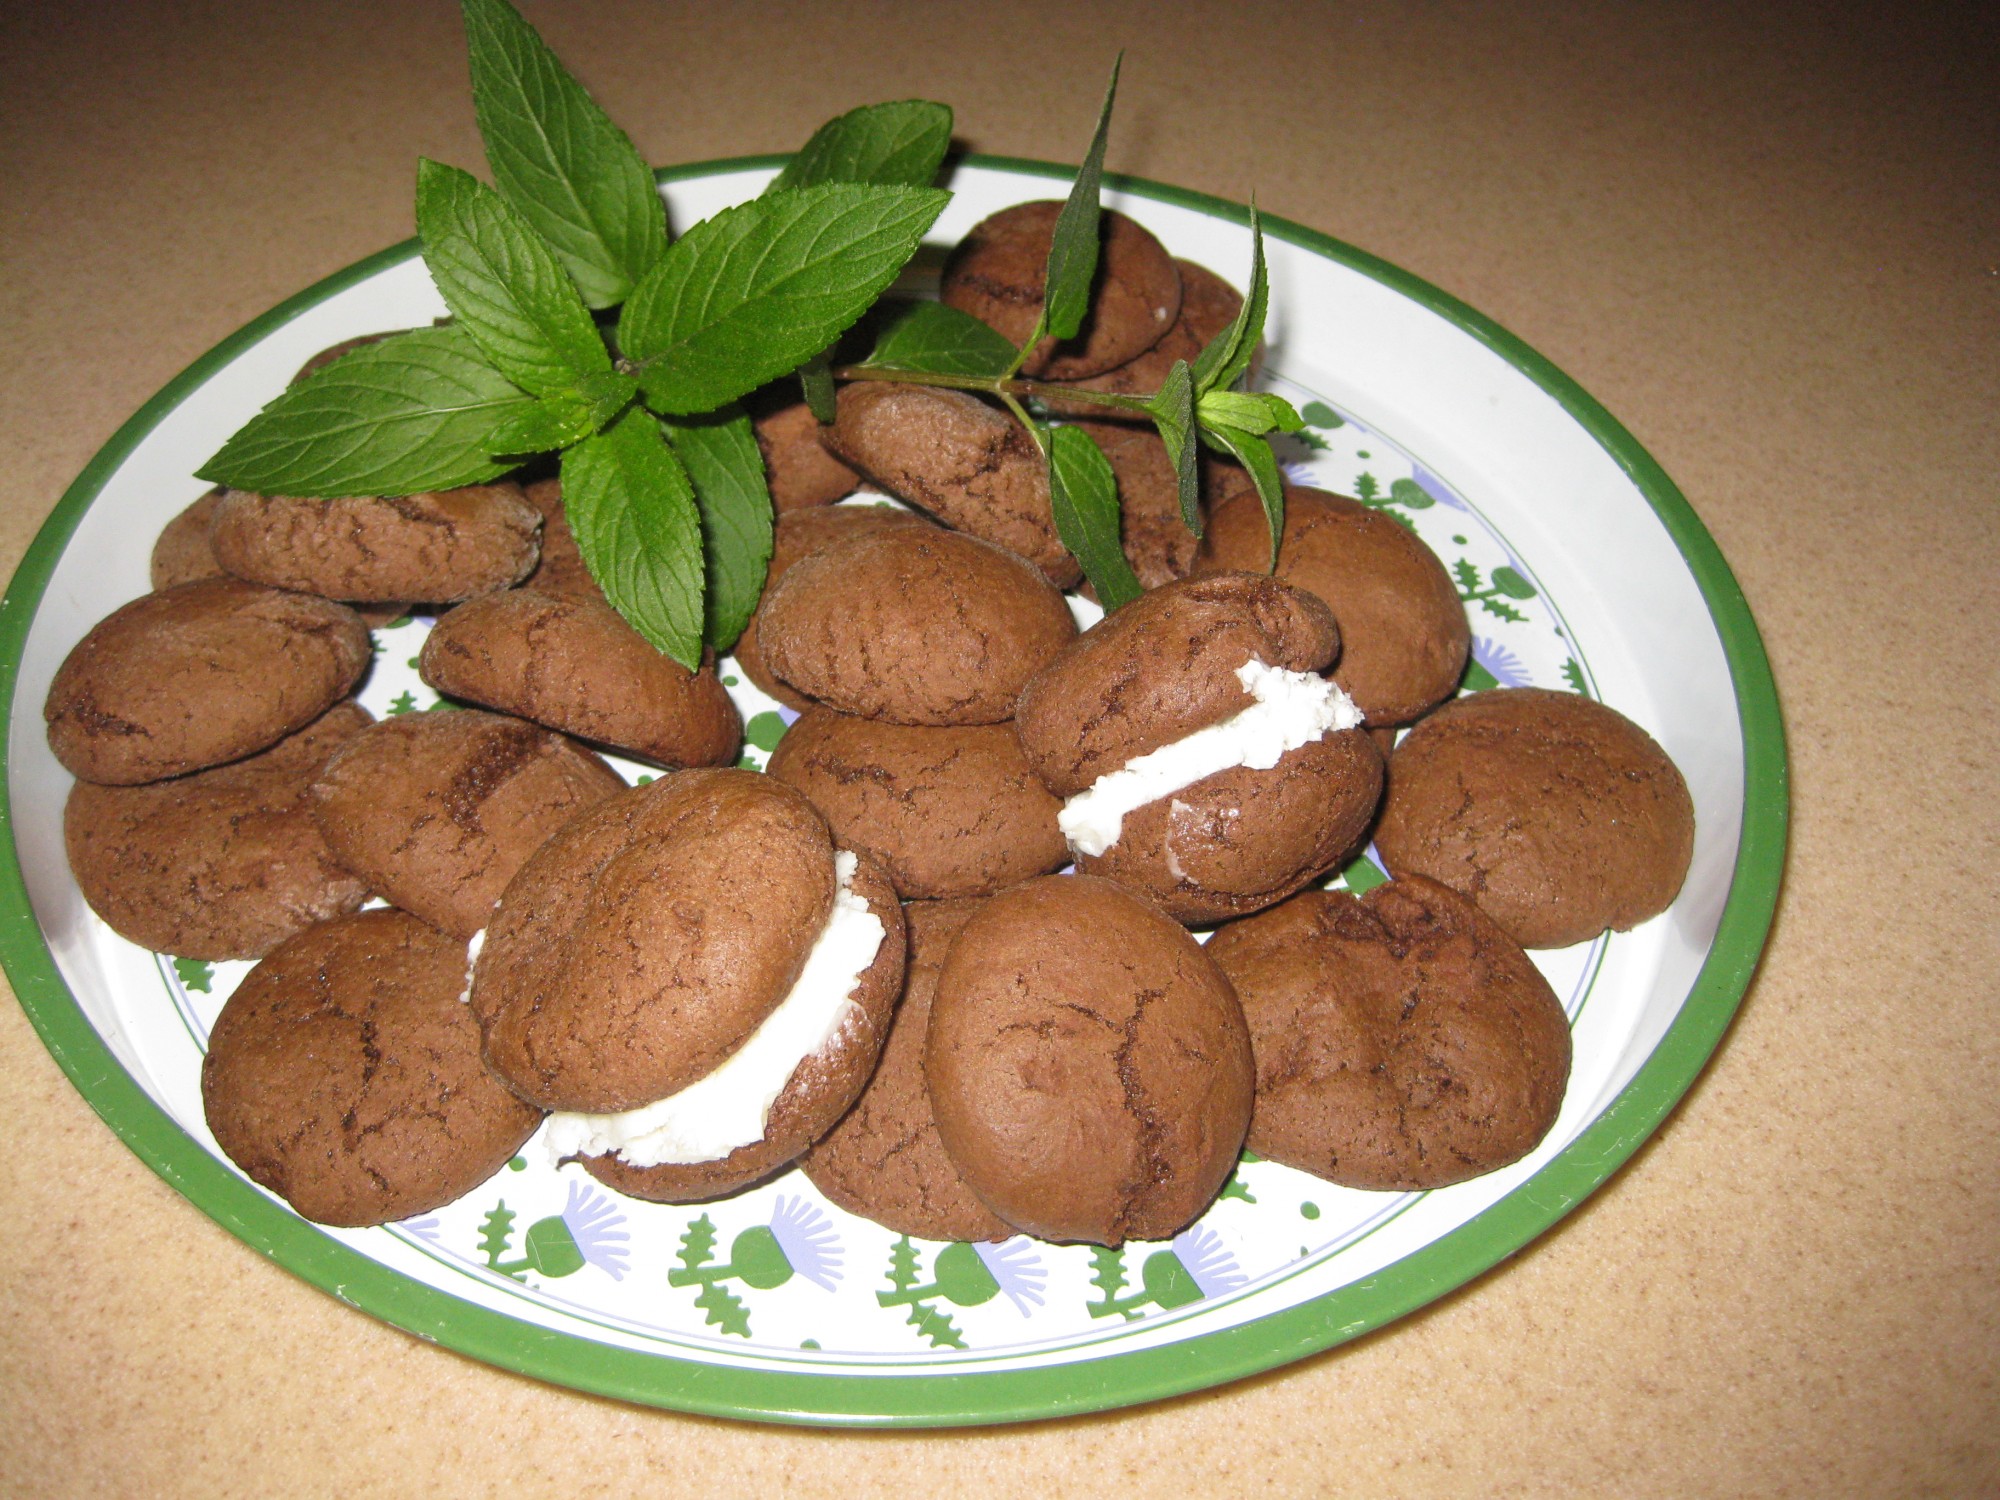 Chocolate mint cookies on a tray decorated with mint leaves.